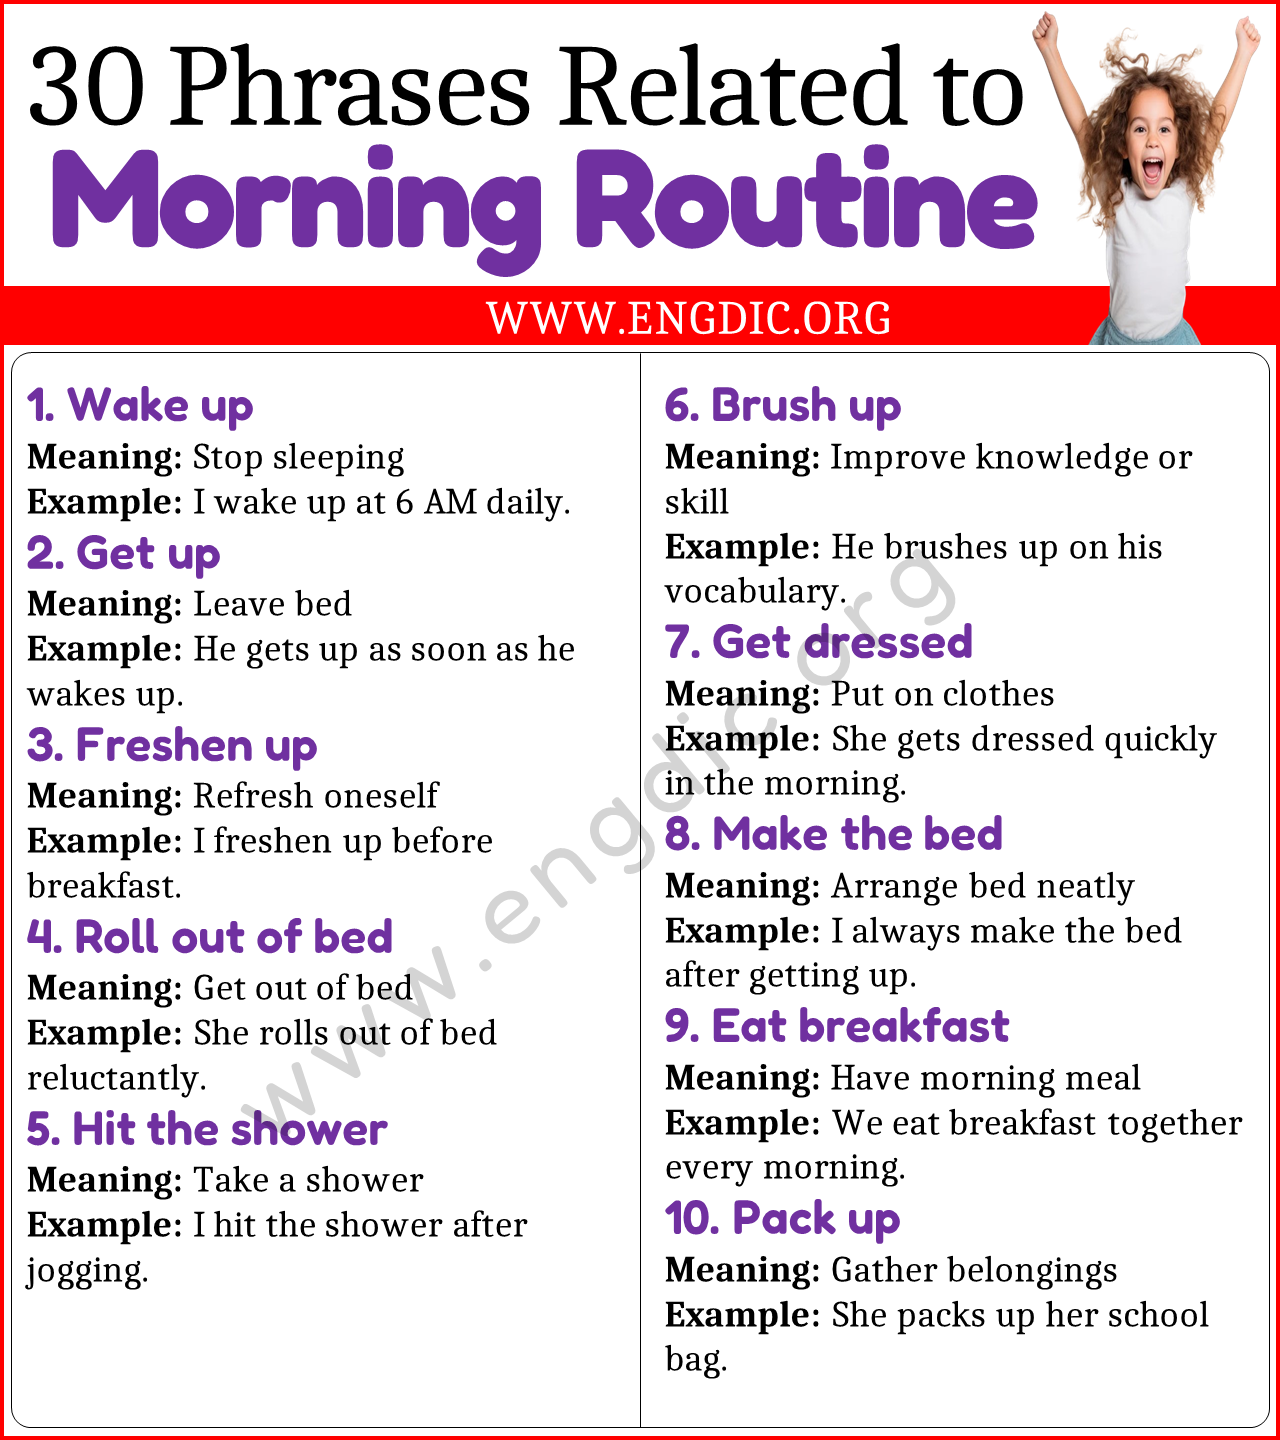 Phrases Related to Morning Routine